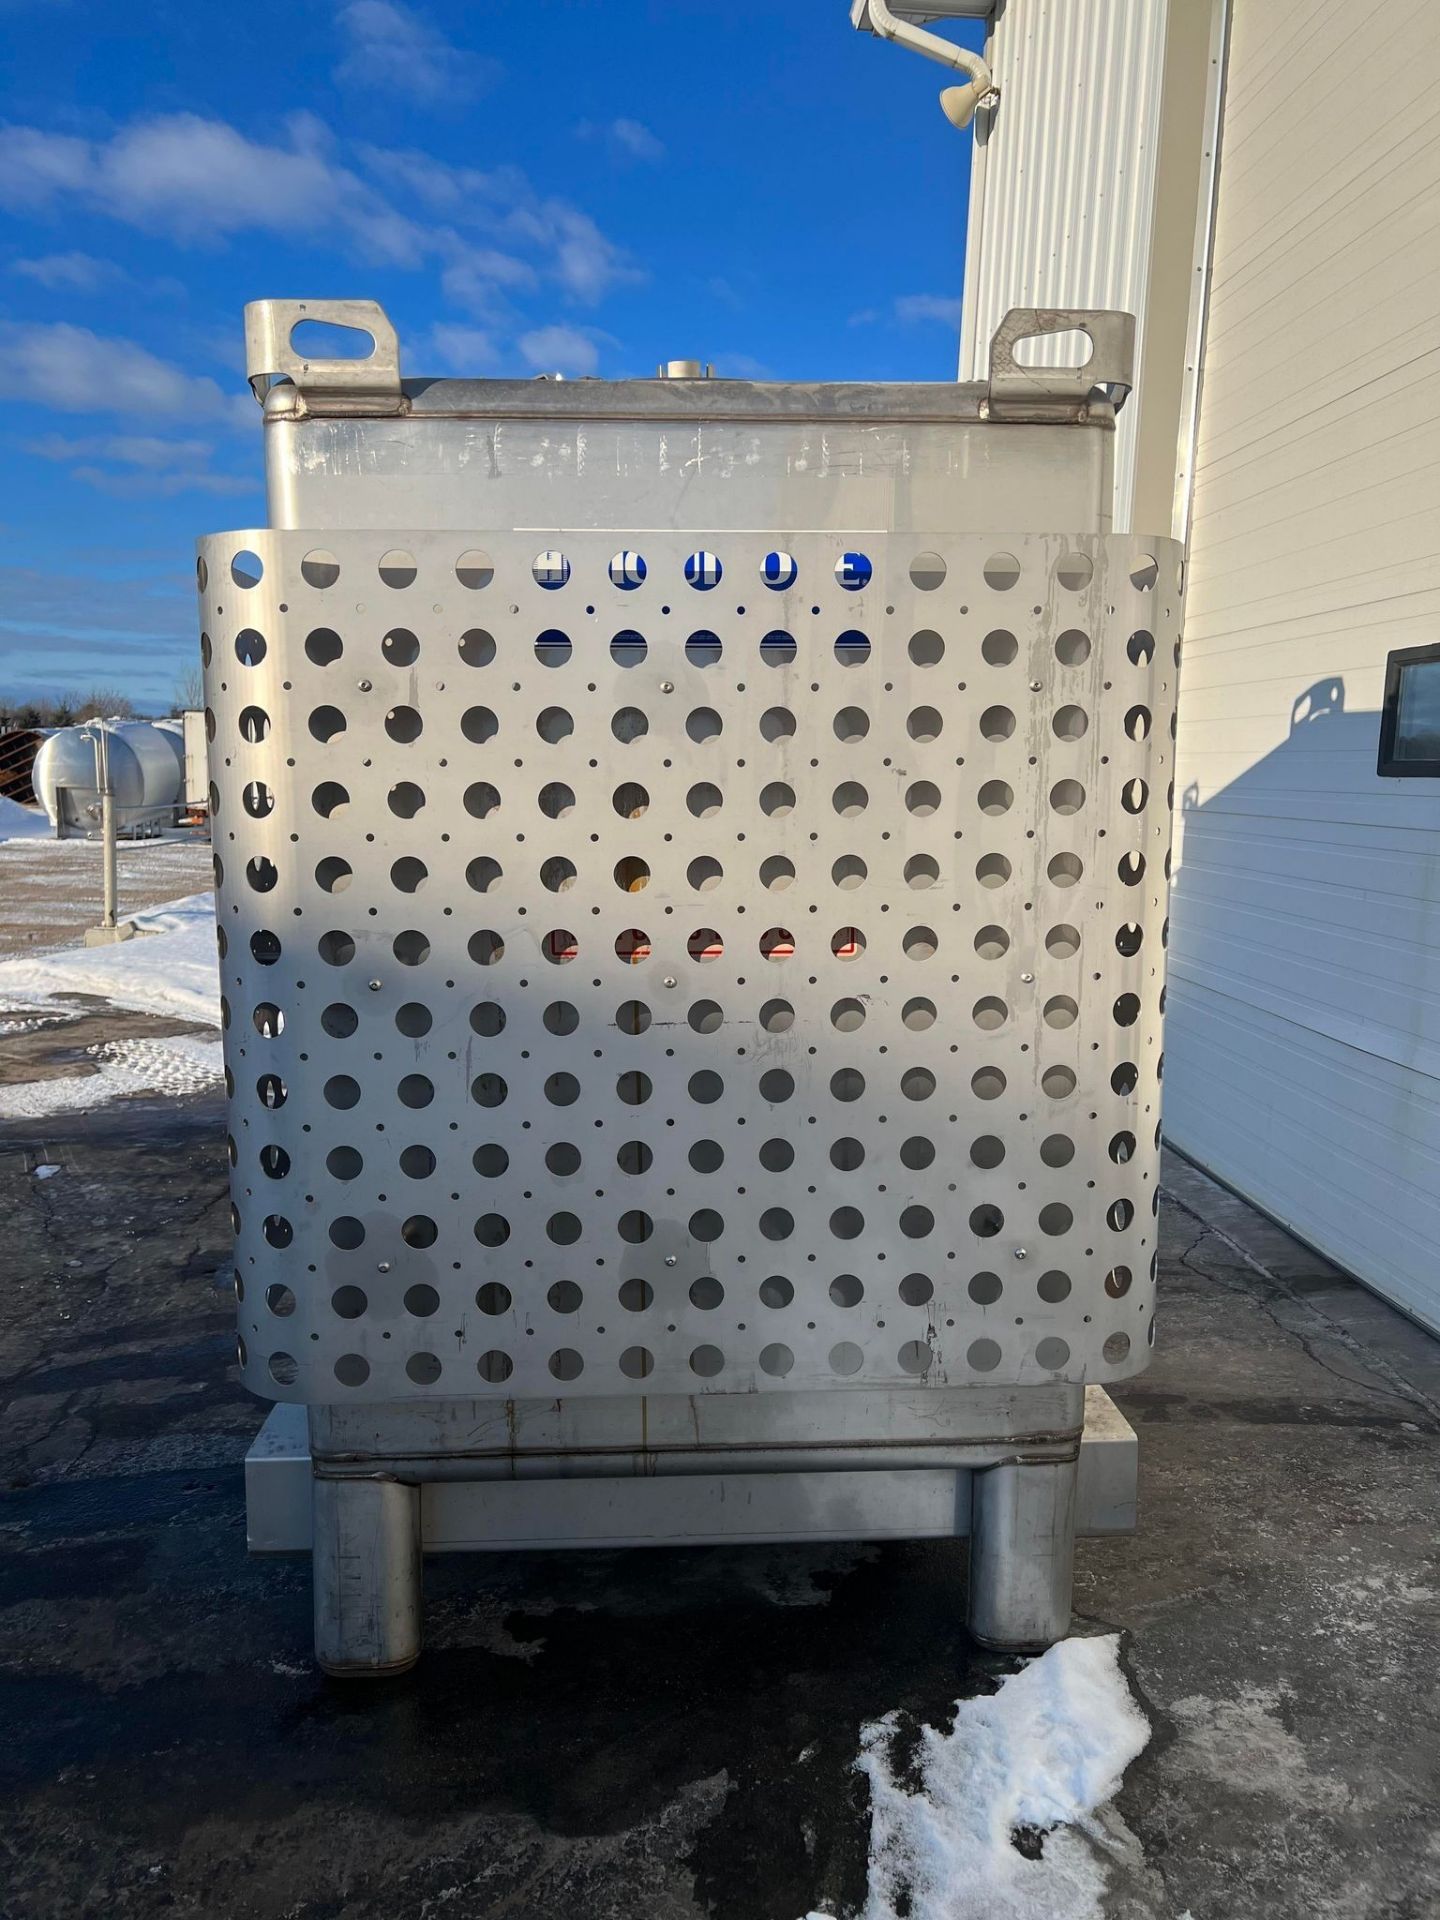 Hoover Solutions 500 Gal. Oil Tank, Model 507605, S/N 235475 with Guarded Sides Around Tank, - Image 2 of 4